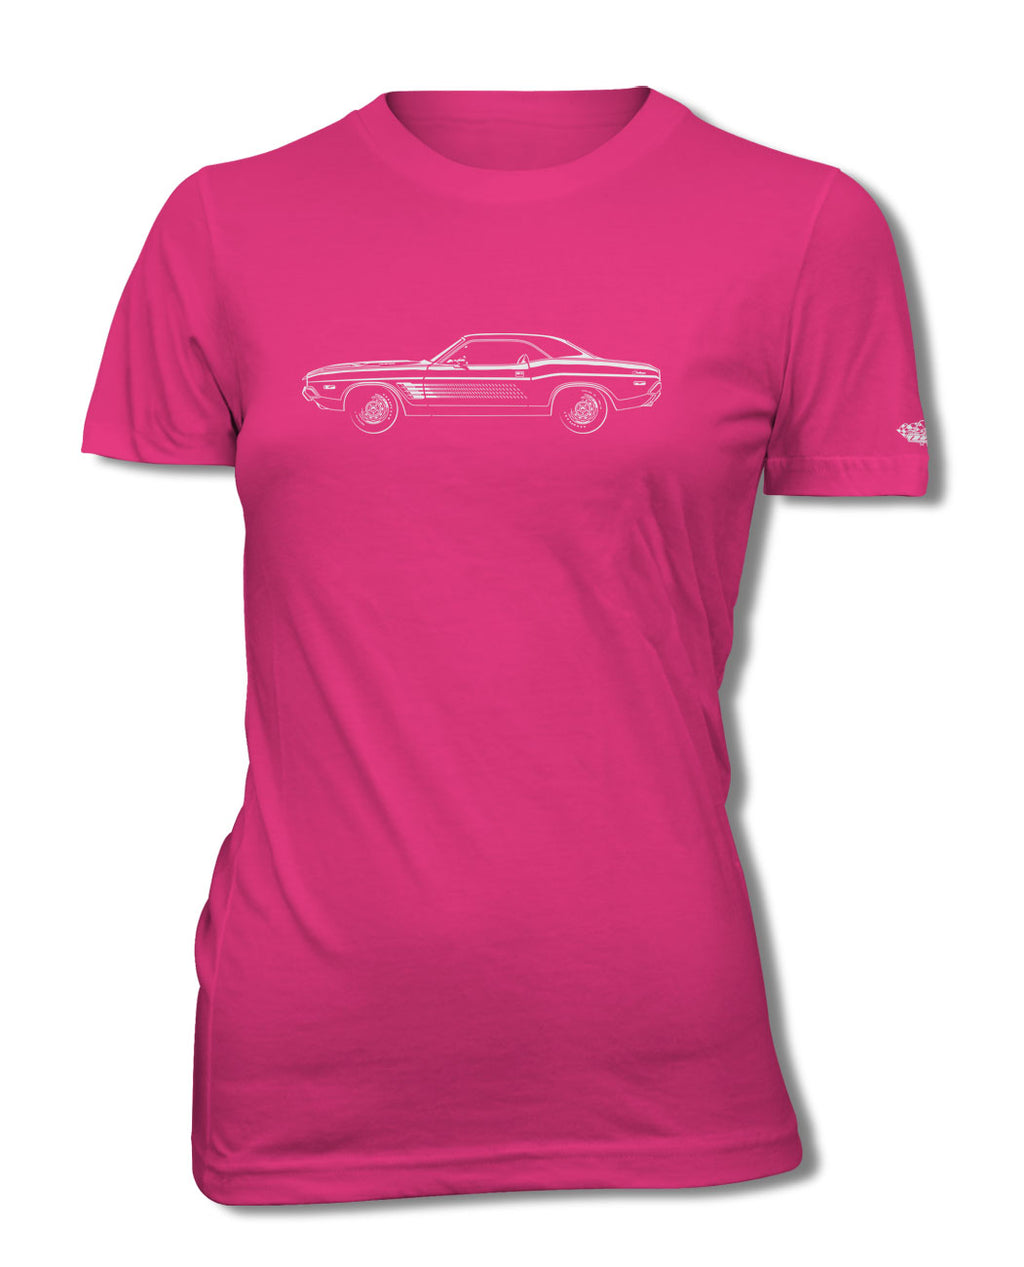 1972 Dodge Challenger Rallye with Stripes Coupe T-Shirt - Women - Side View